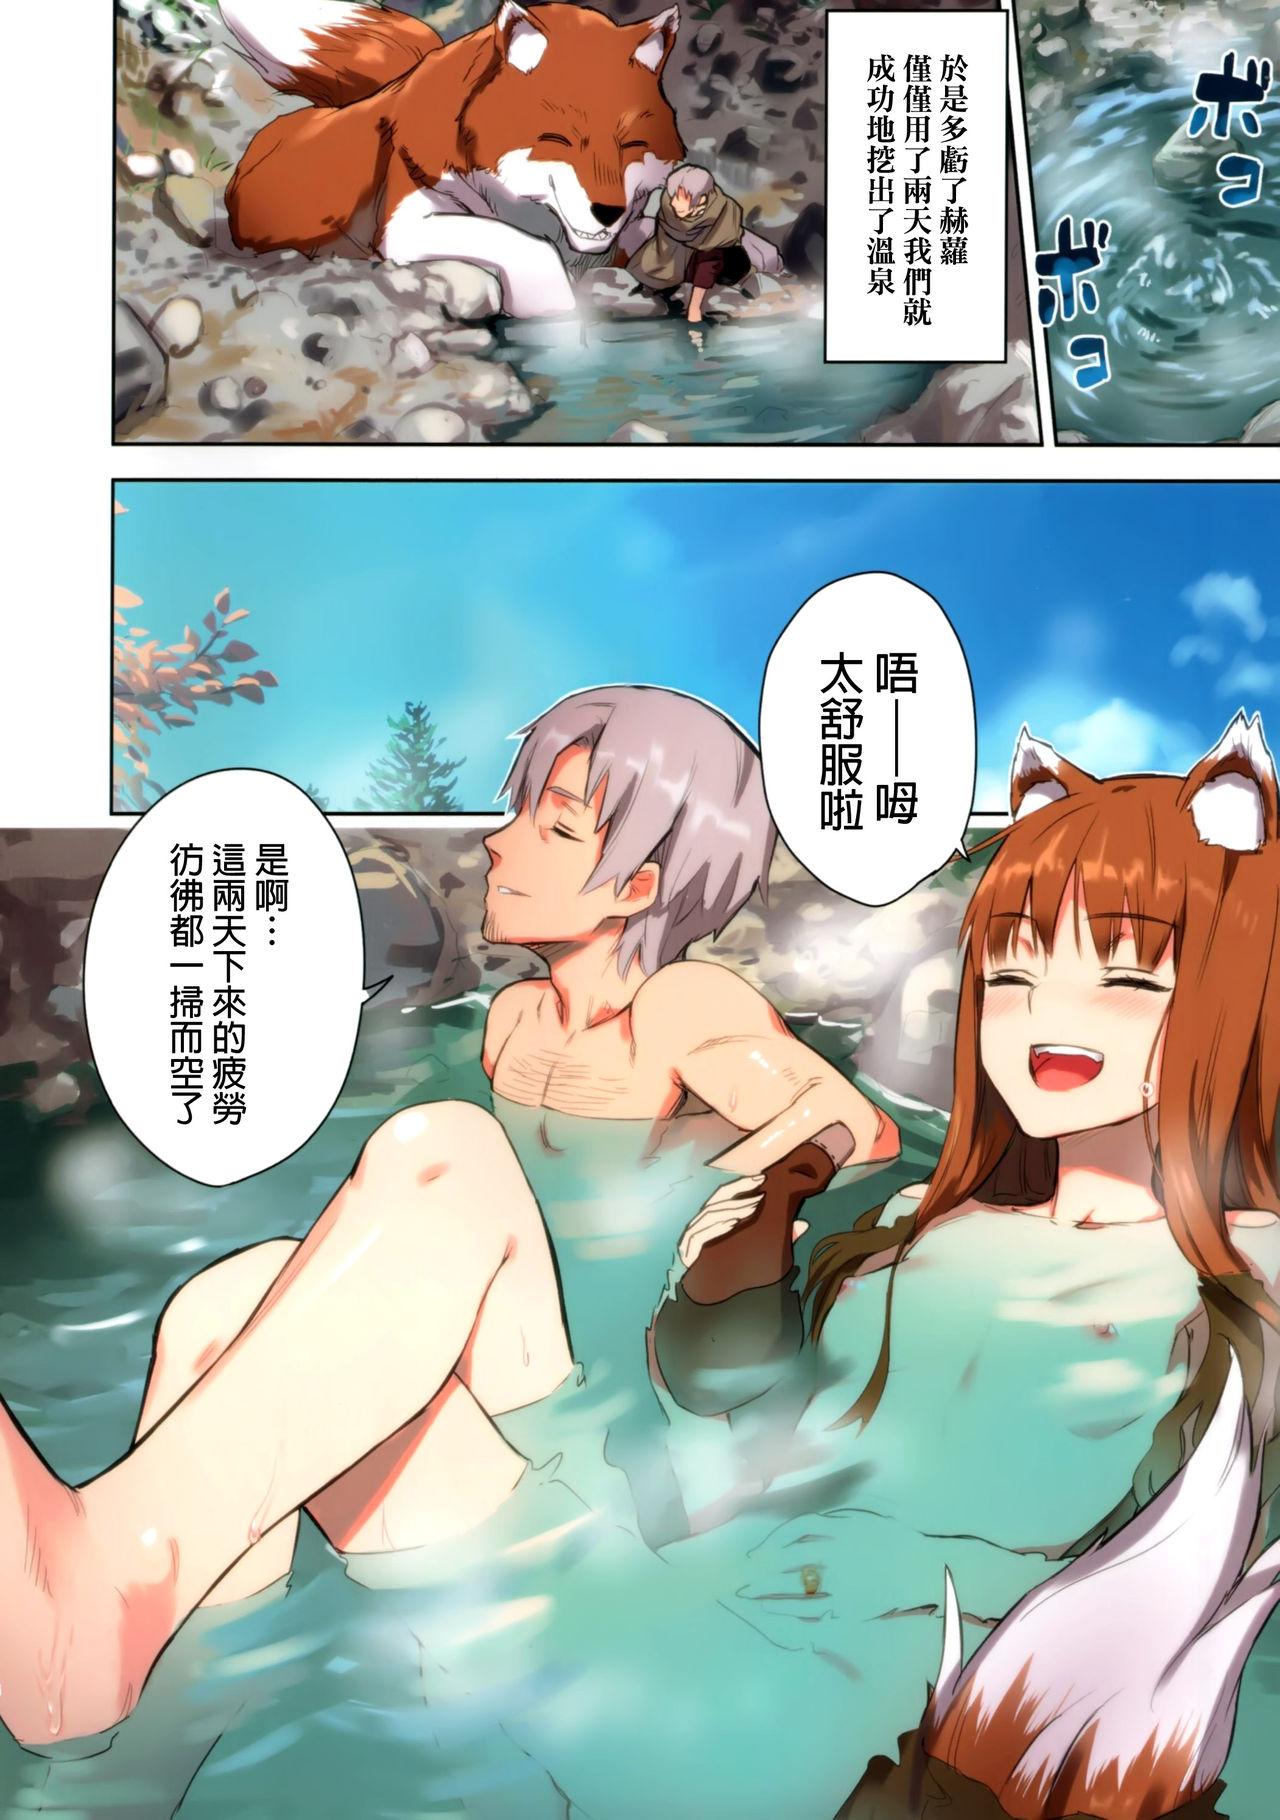 Denmark Wacchi to Nyohhira Bon FULL COLOR - Spice and wolf Tgirl - Page 7